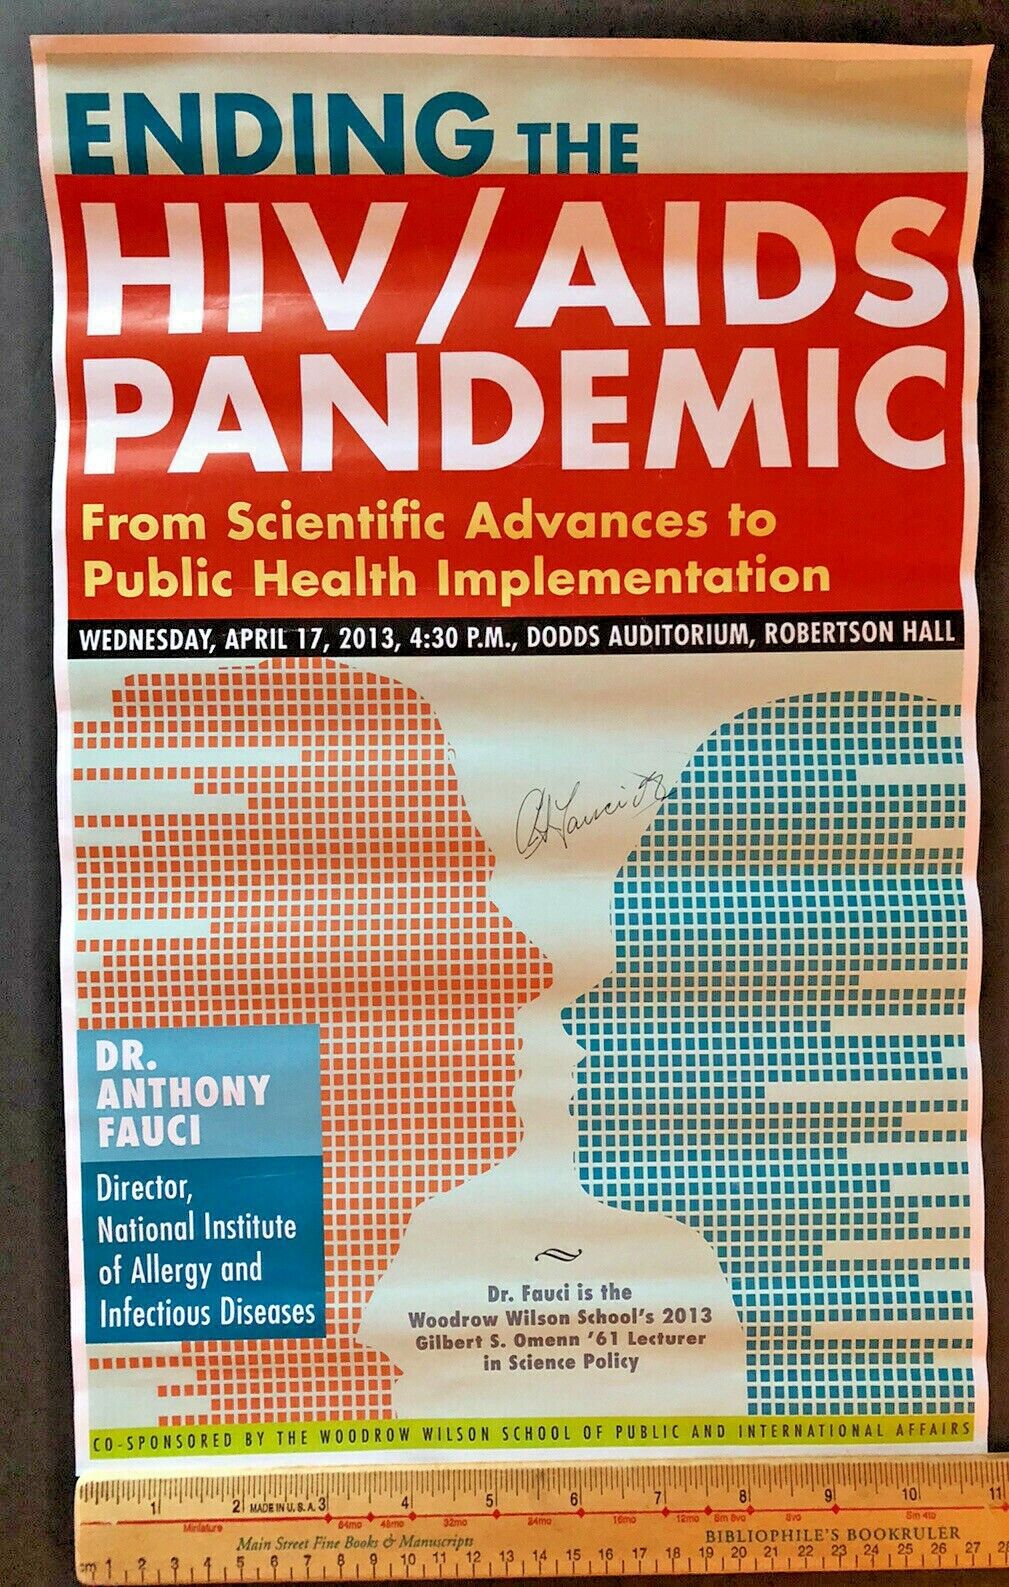 HIV Aids Pandemic 2013 DR ANTHONY FAUCI SIGNED POSTER Princeton University RARE